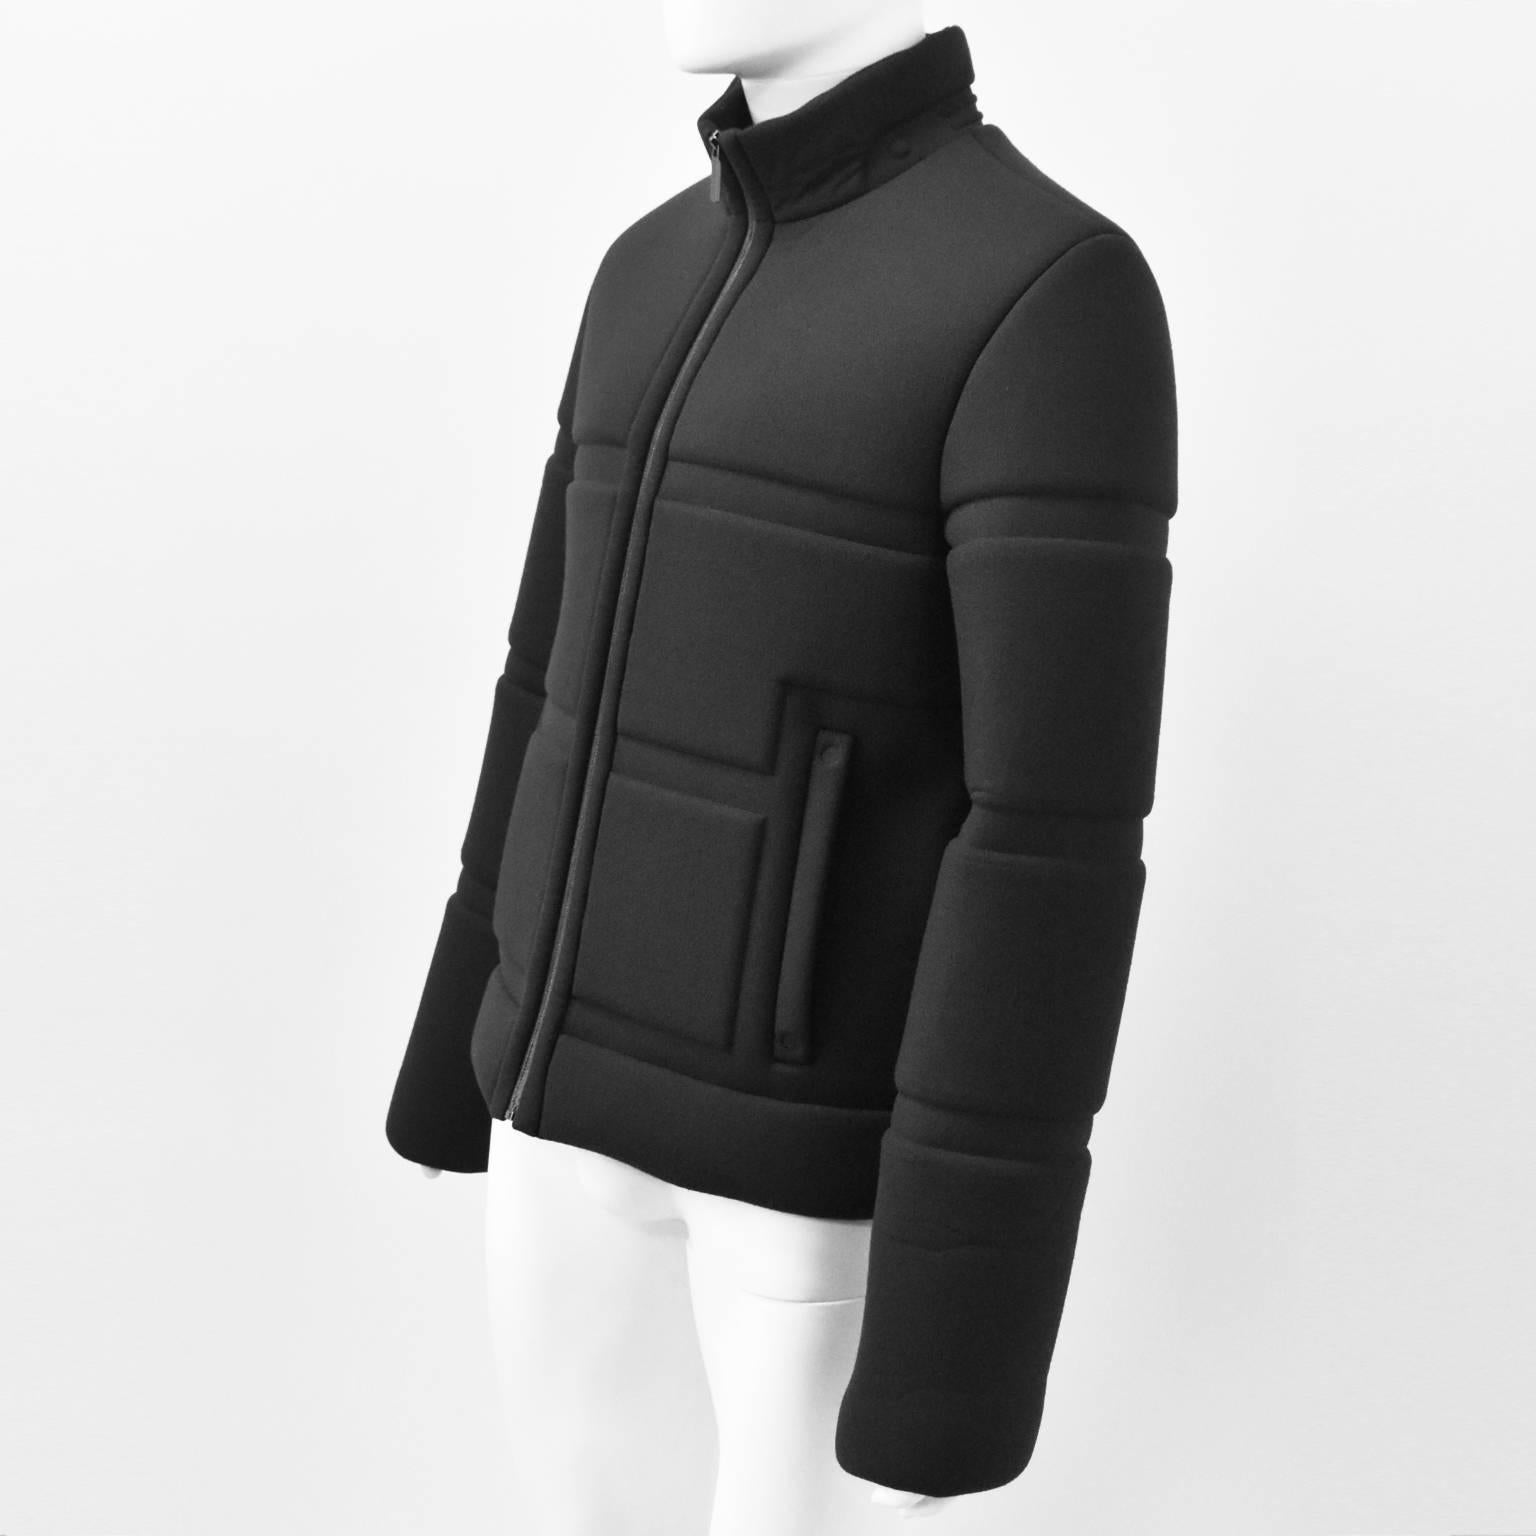 A modern and unusual structured grey jacket by Calvin Klein. The jacket is made from a neoprene style, padded material that is a wool and polyamide blend. This creates an unusual  structured shape that looks geometric but is still flexible. The